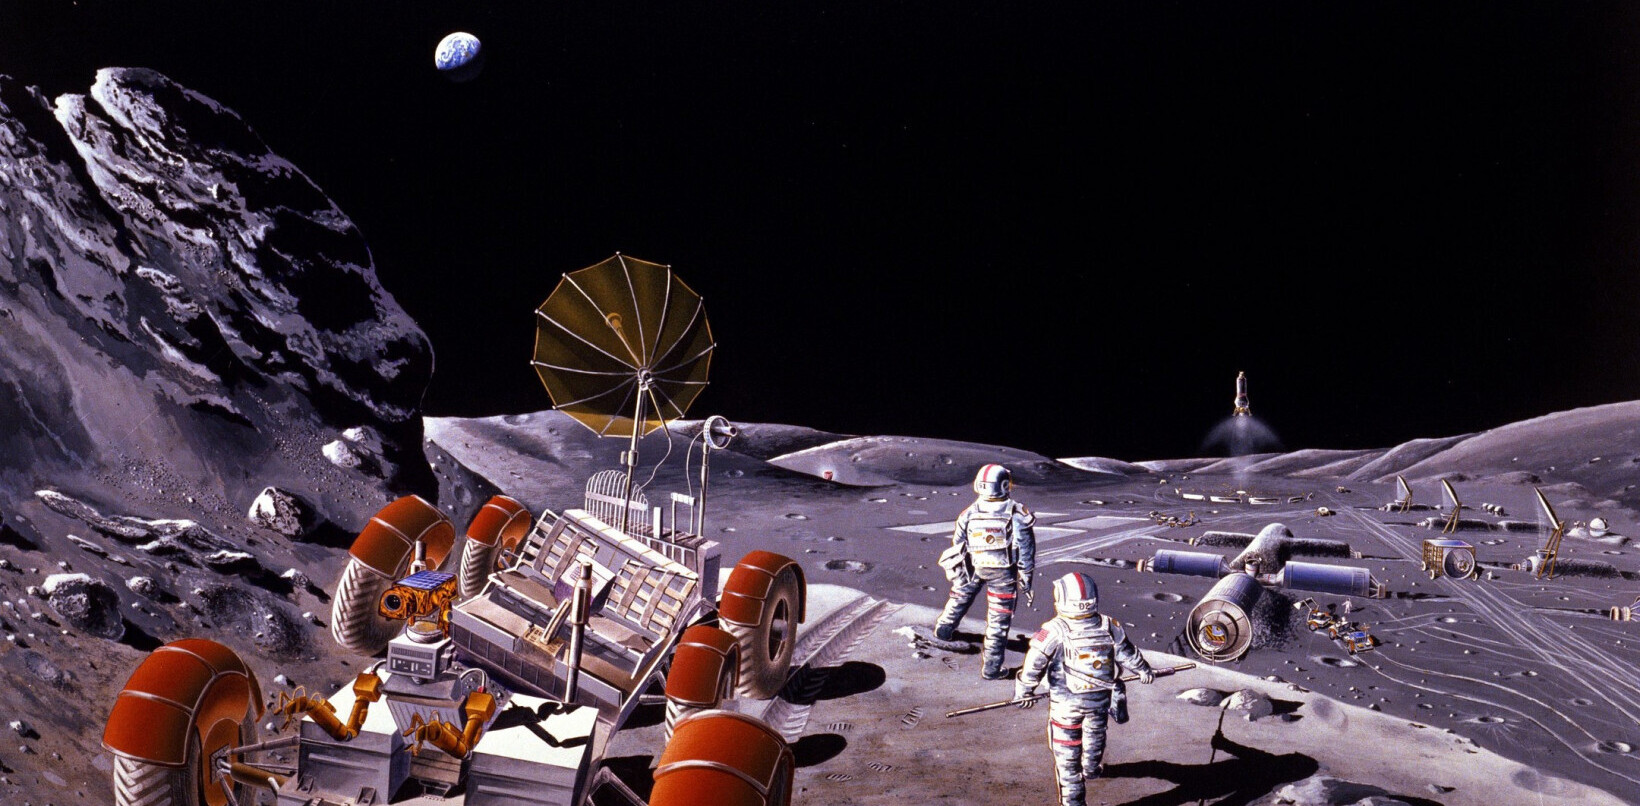 This is why China and Russia want to build a base on the Moon